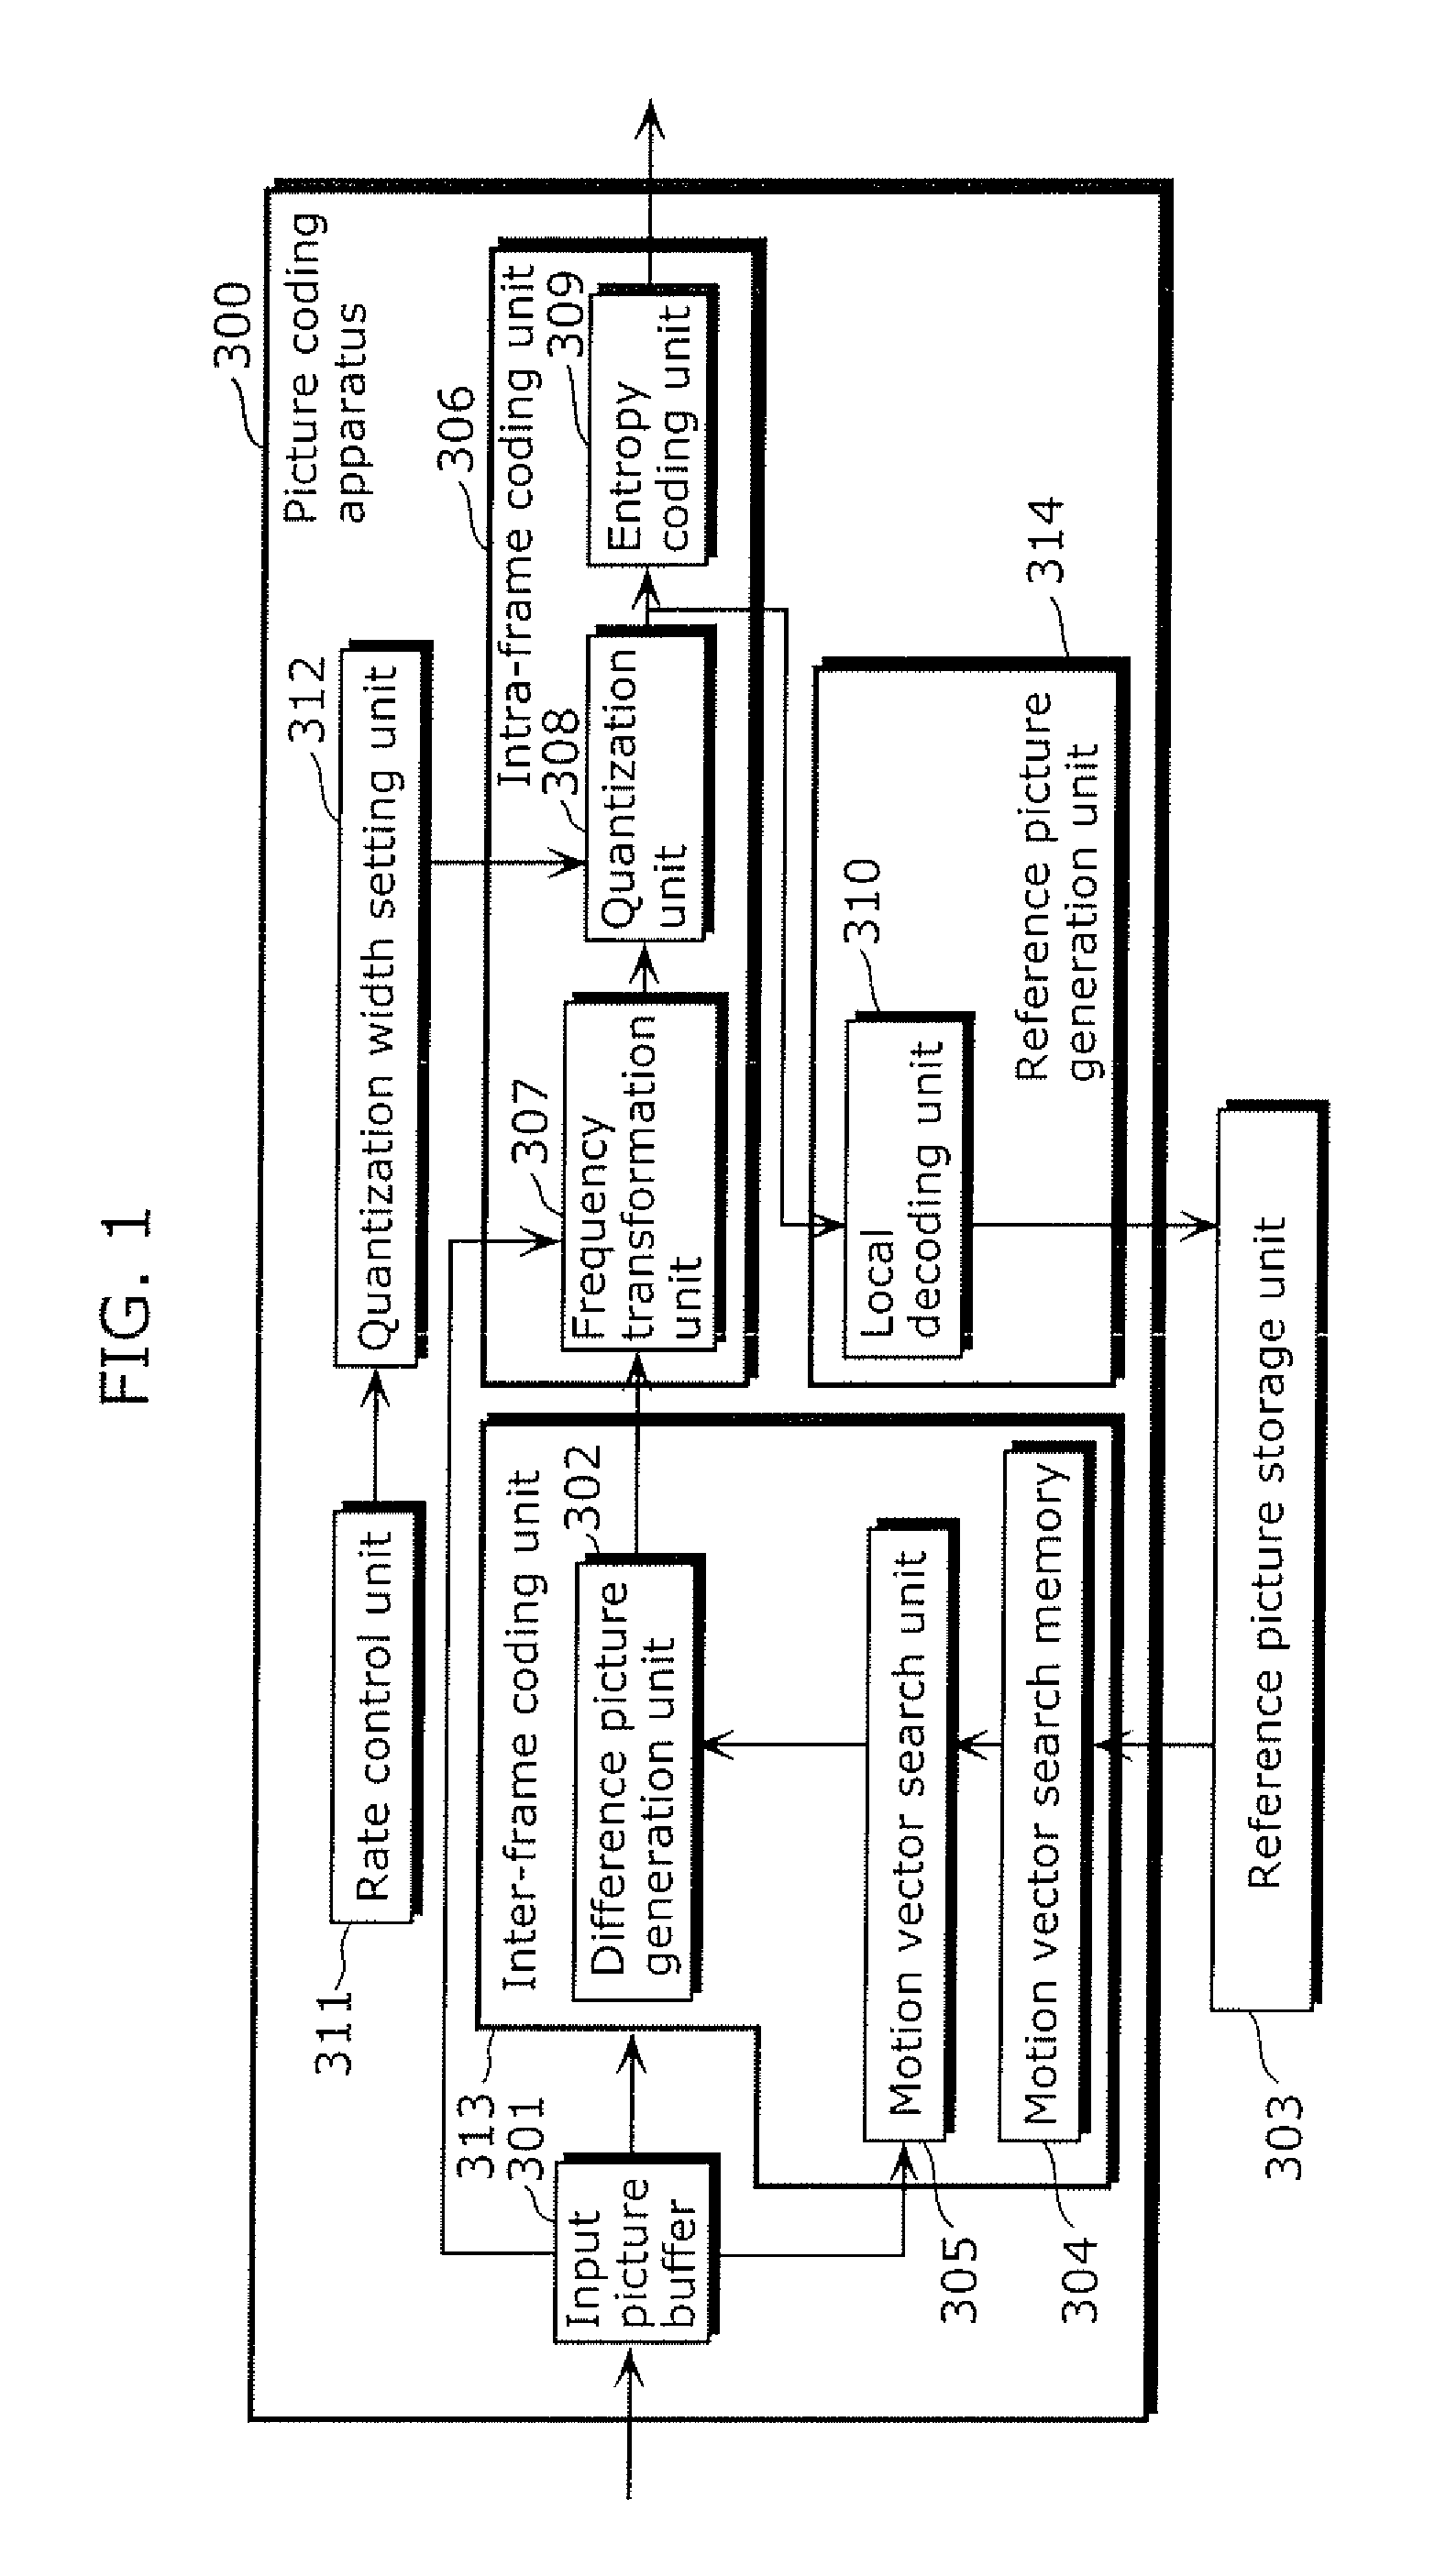 Moving picture coding apparatus, method and program